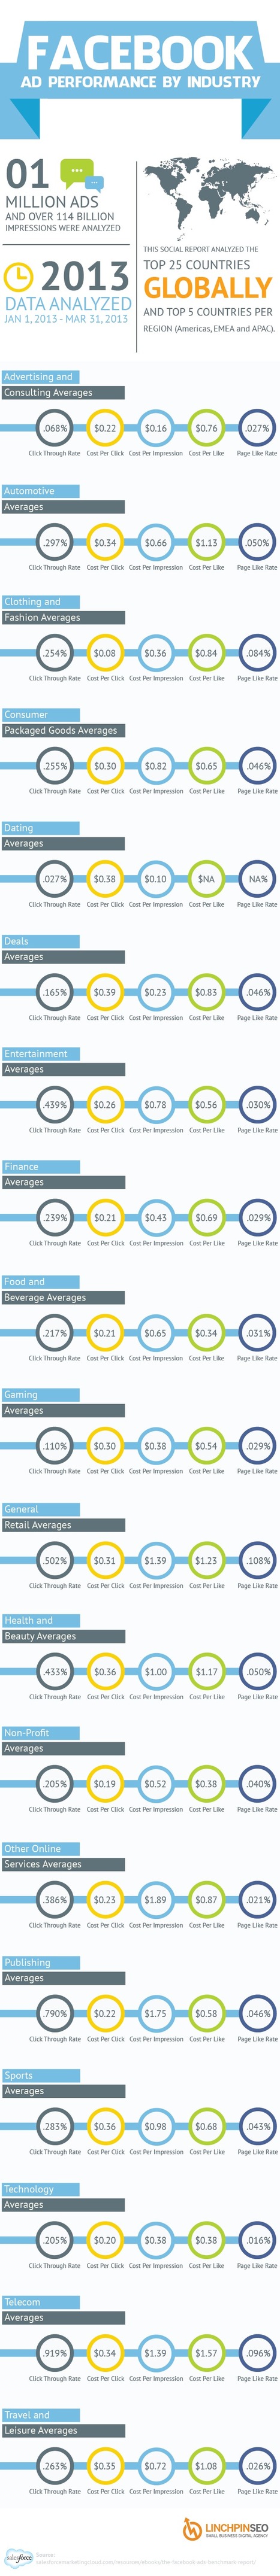 [Infographic] Facebook Ad Performance by Industry | Design, Science and Technology | Scoop.it